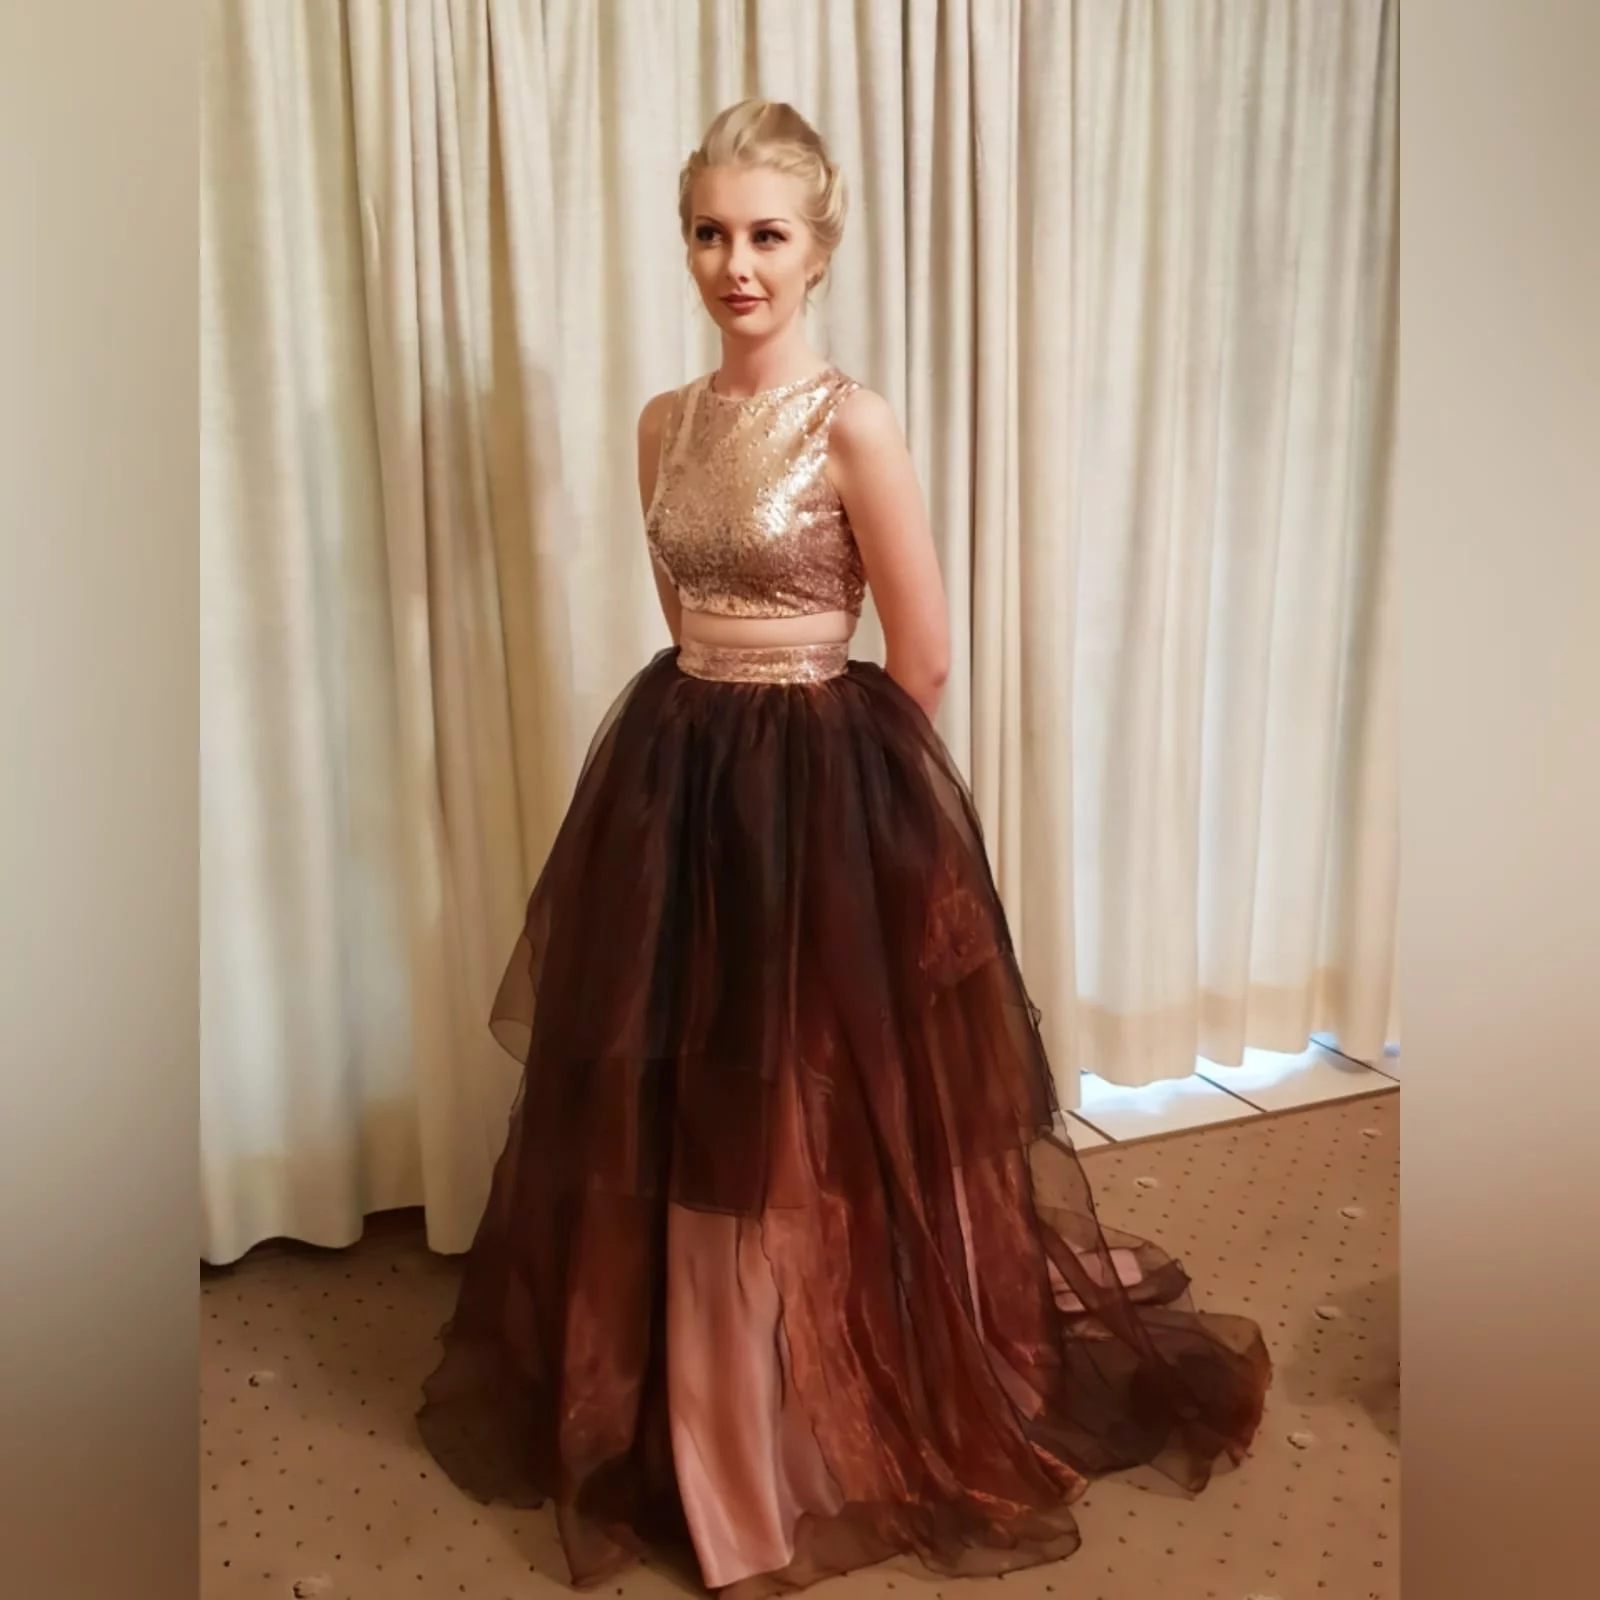 2 piece brown and rose gold matric farewell dress 1 this awesome versatile evening dress was created for a matric farewell dance. 2 piece brown and rose gold prom dress. With a layered organza full skirt and sequins waistband. Crop top in rosegold sequins which can be reused in several other occasions